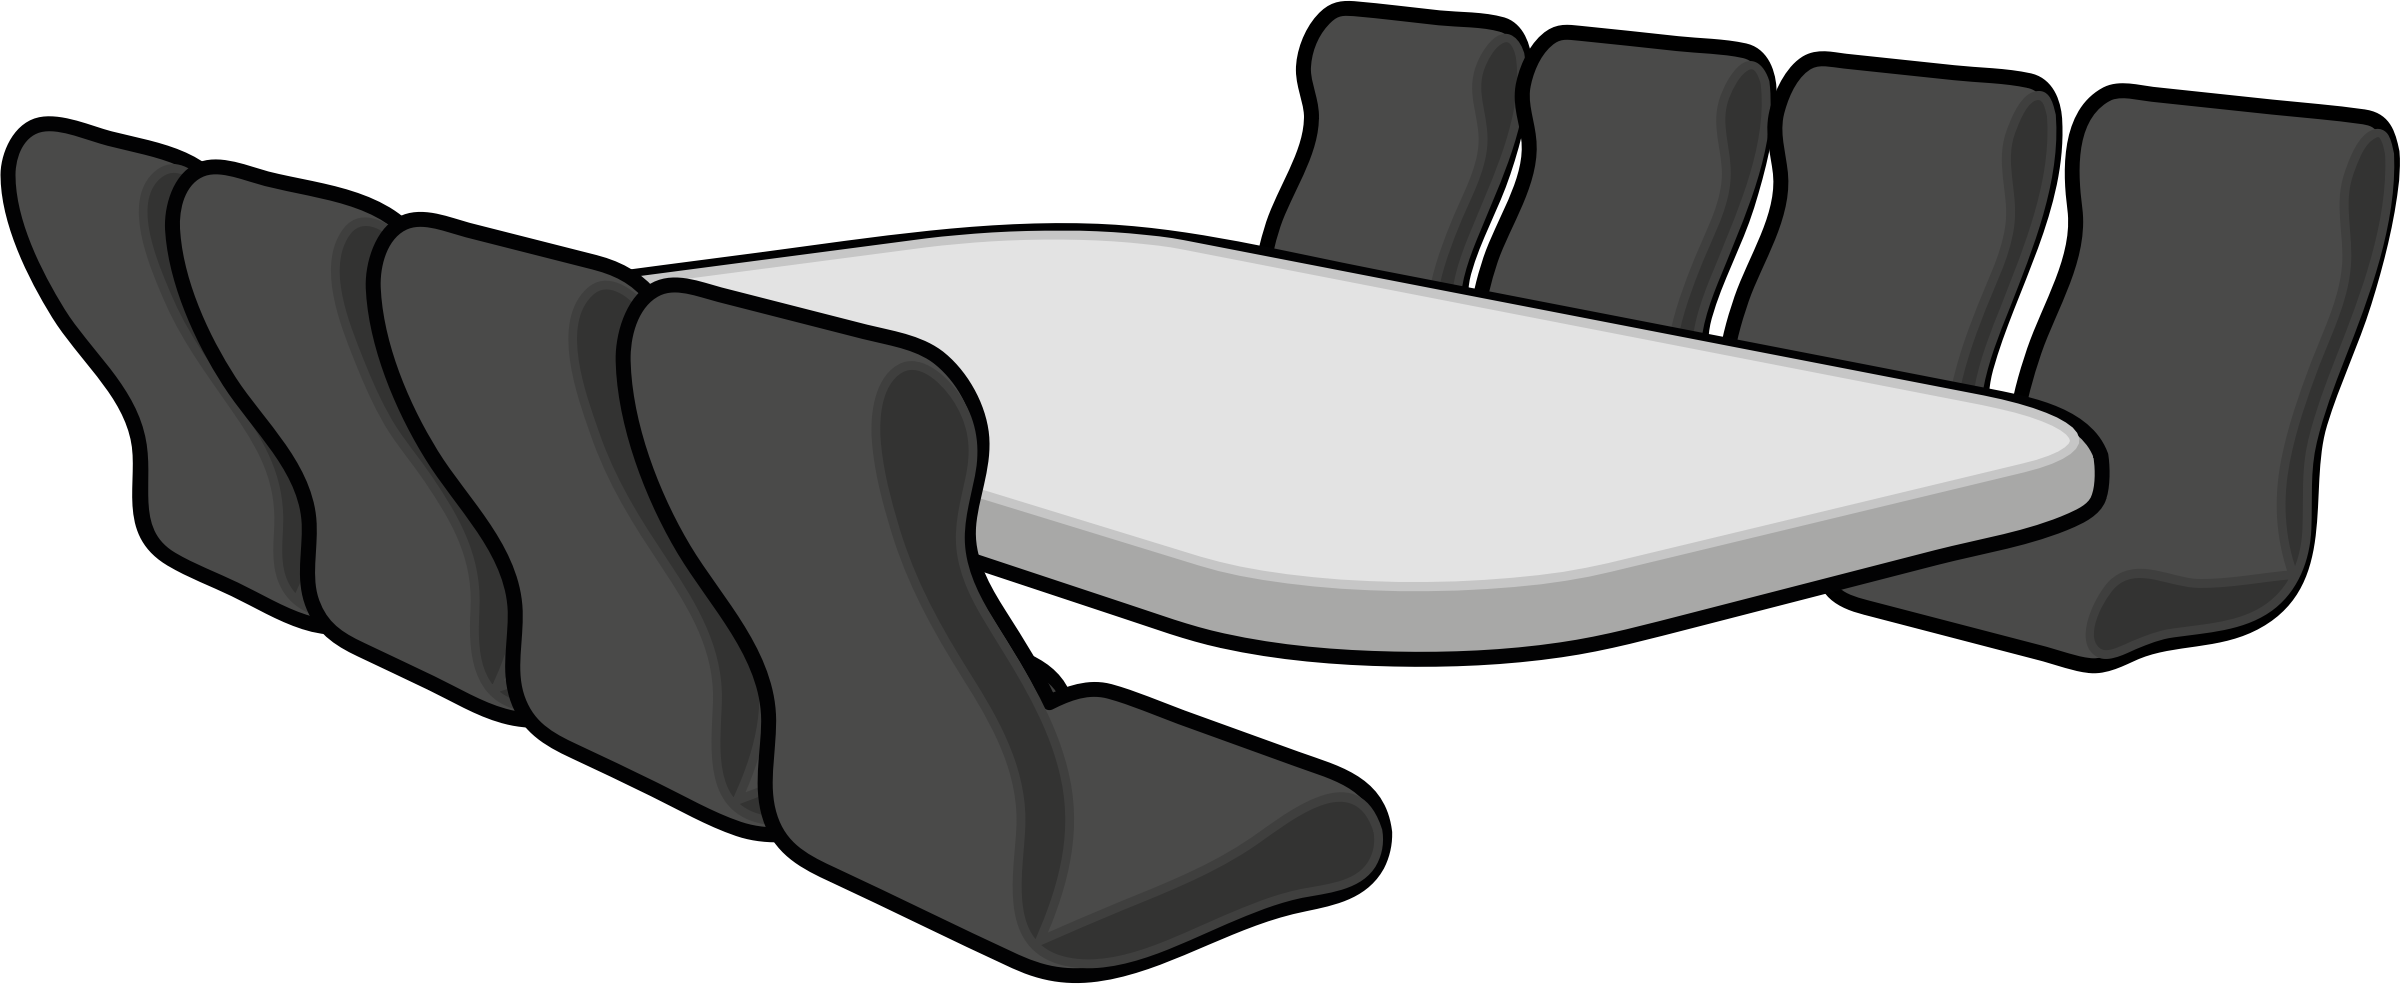 conference room clipart - photo #28